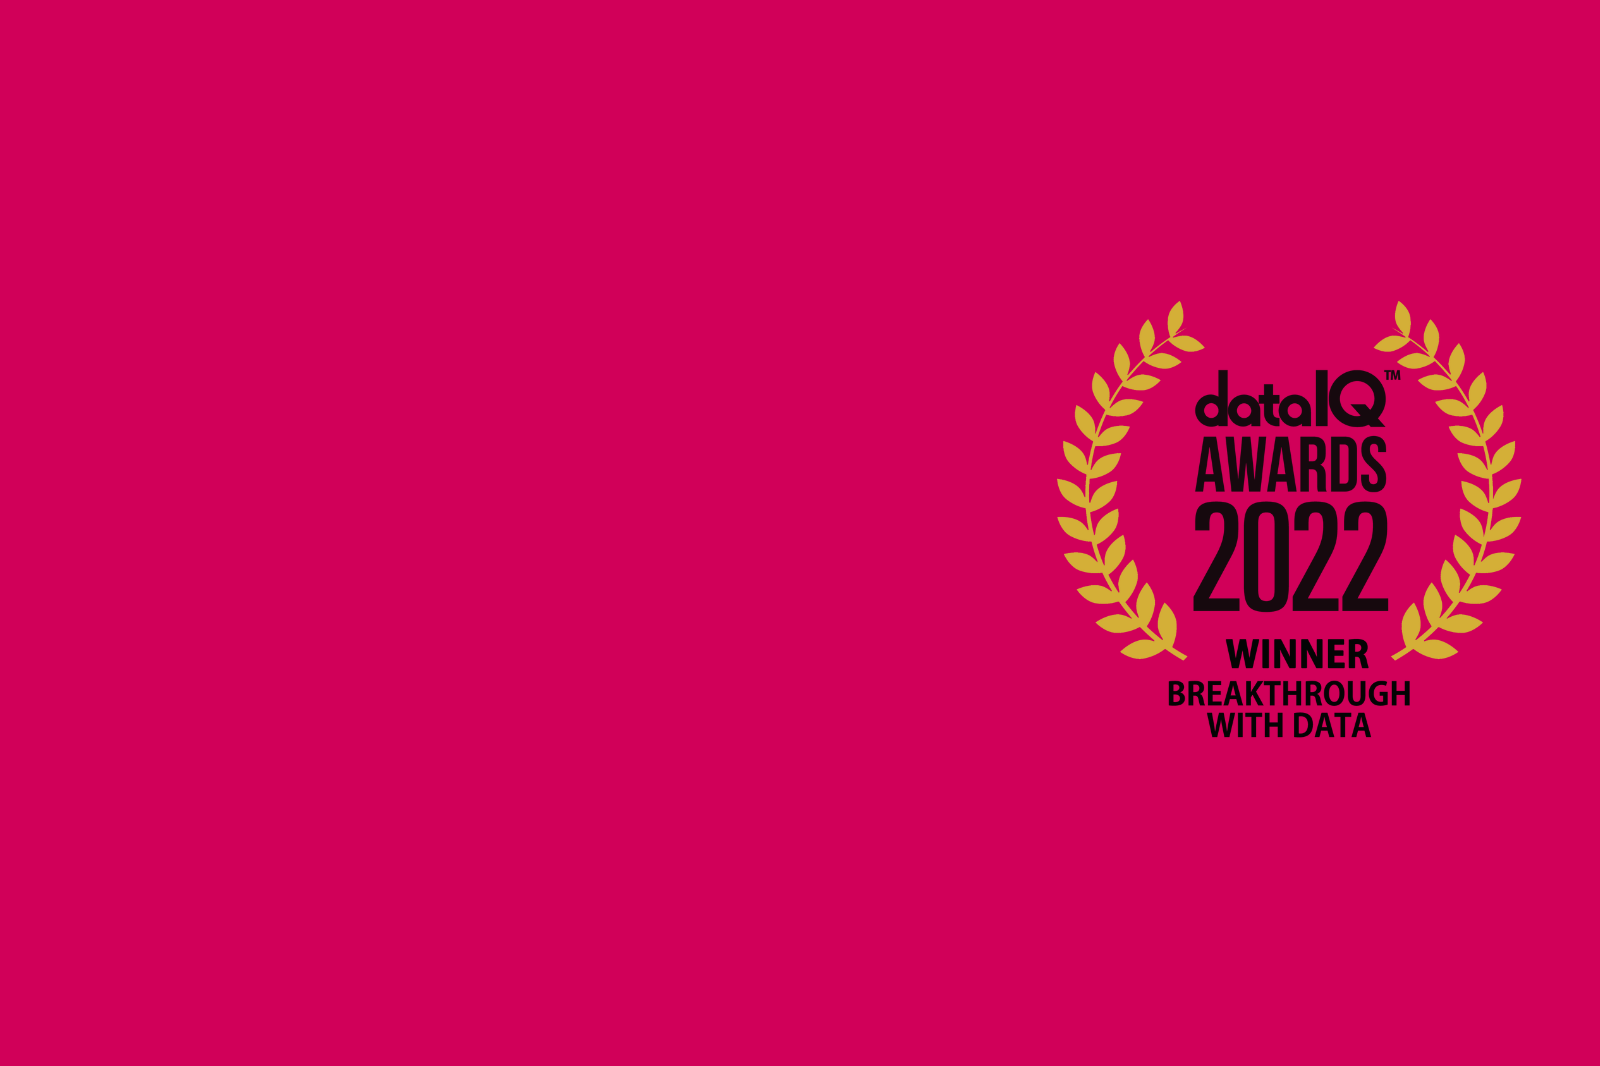 A pink background with the logo for the Data IQ Awards 2022 Winner.